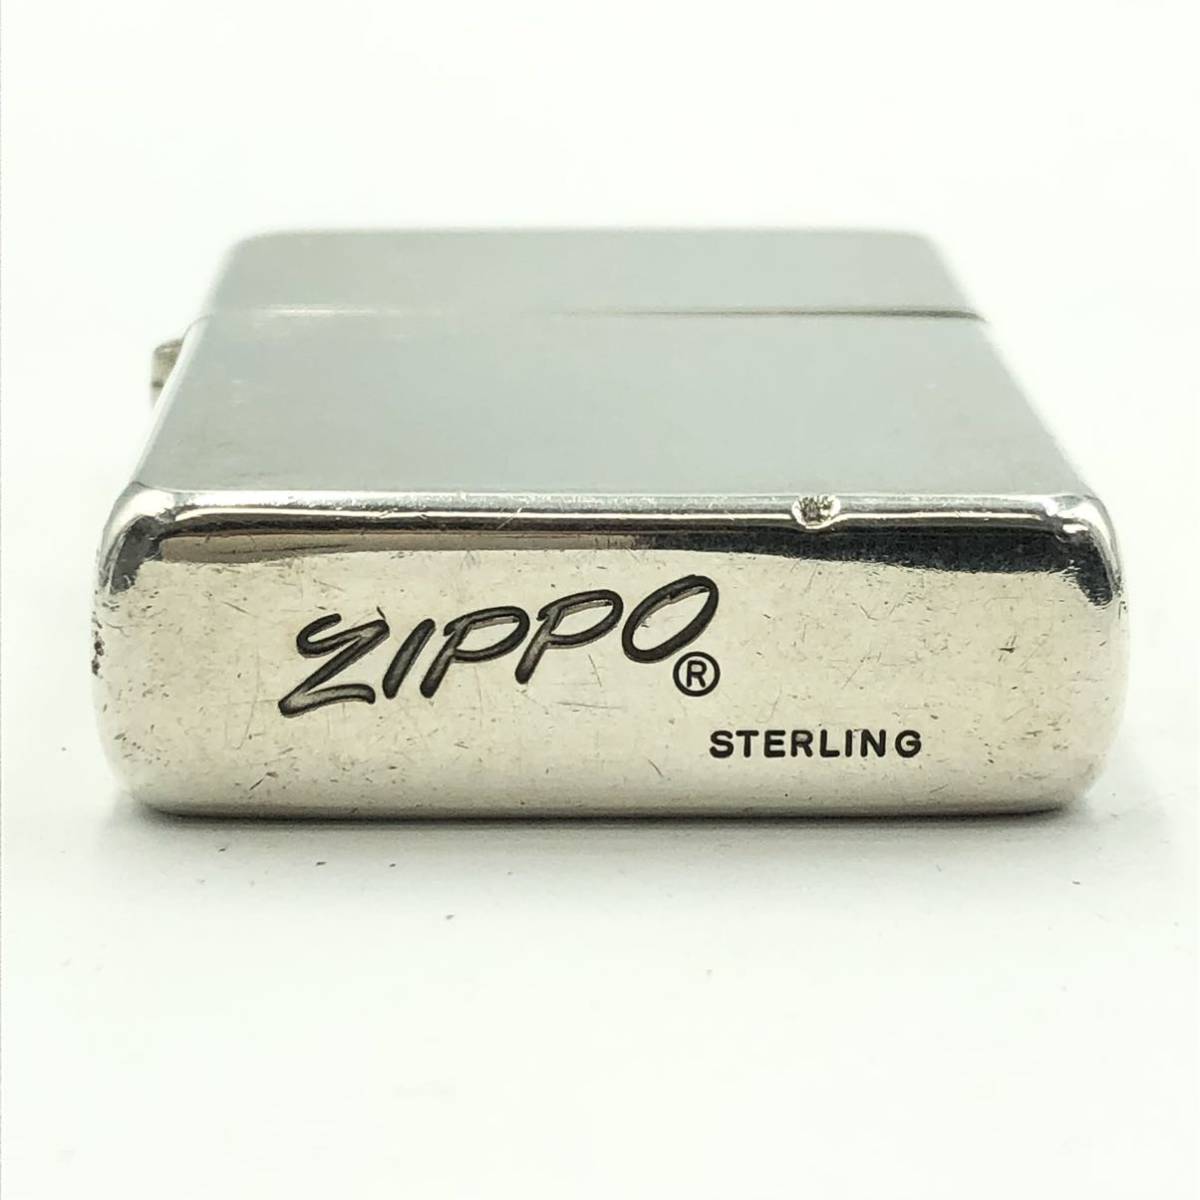 ZIPPO STERLING SILVER イタリック ヴィンテージ 小物 タバコグッズ ...